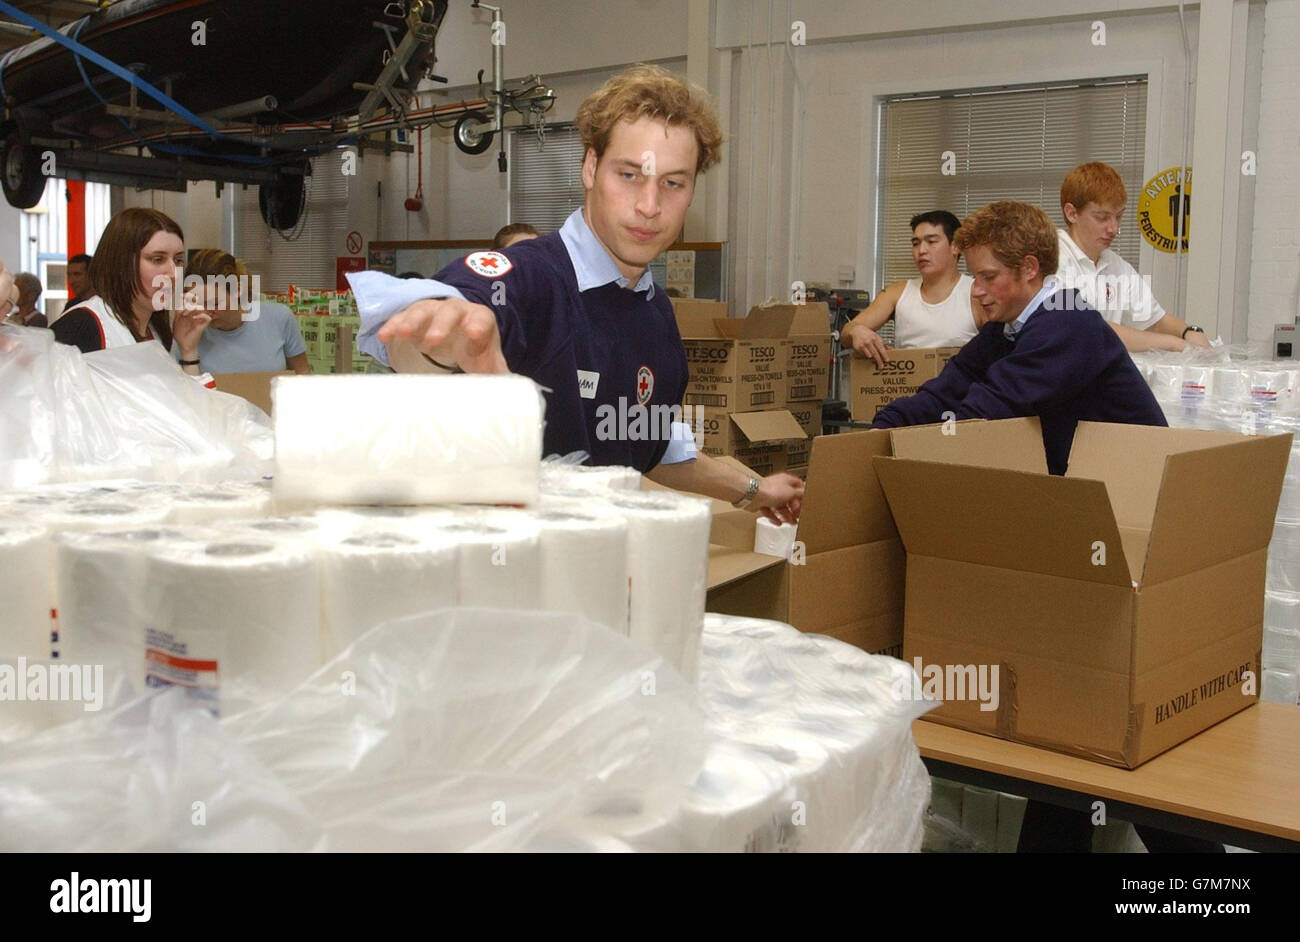 Prince William (left) and Prince Harry help with the packing of items bound for the Maldives. WPA Rota Stock Photo